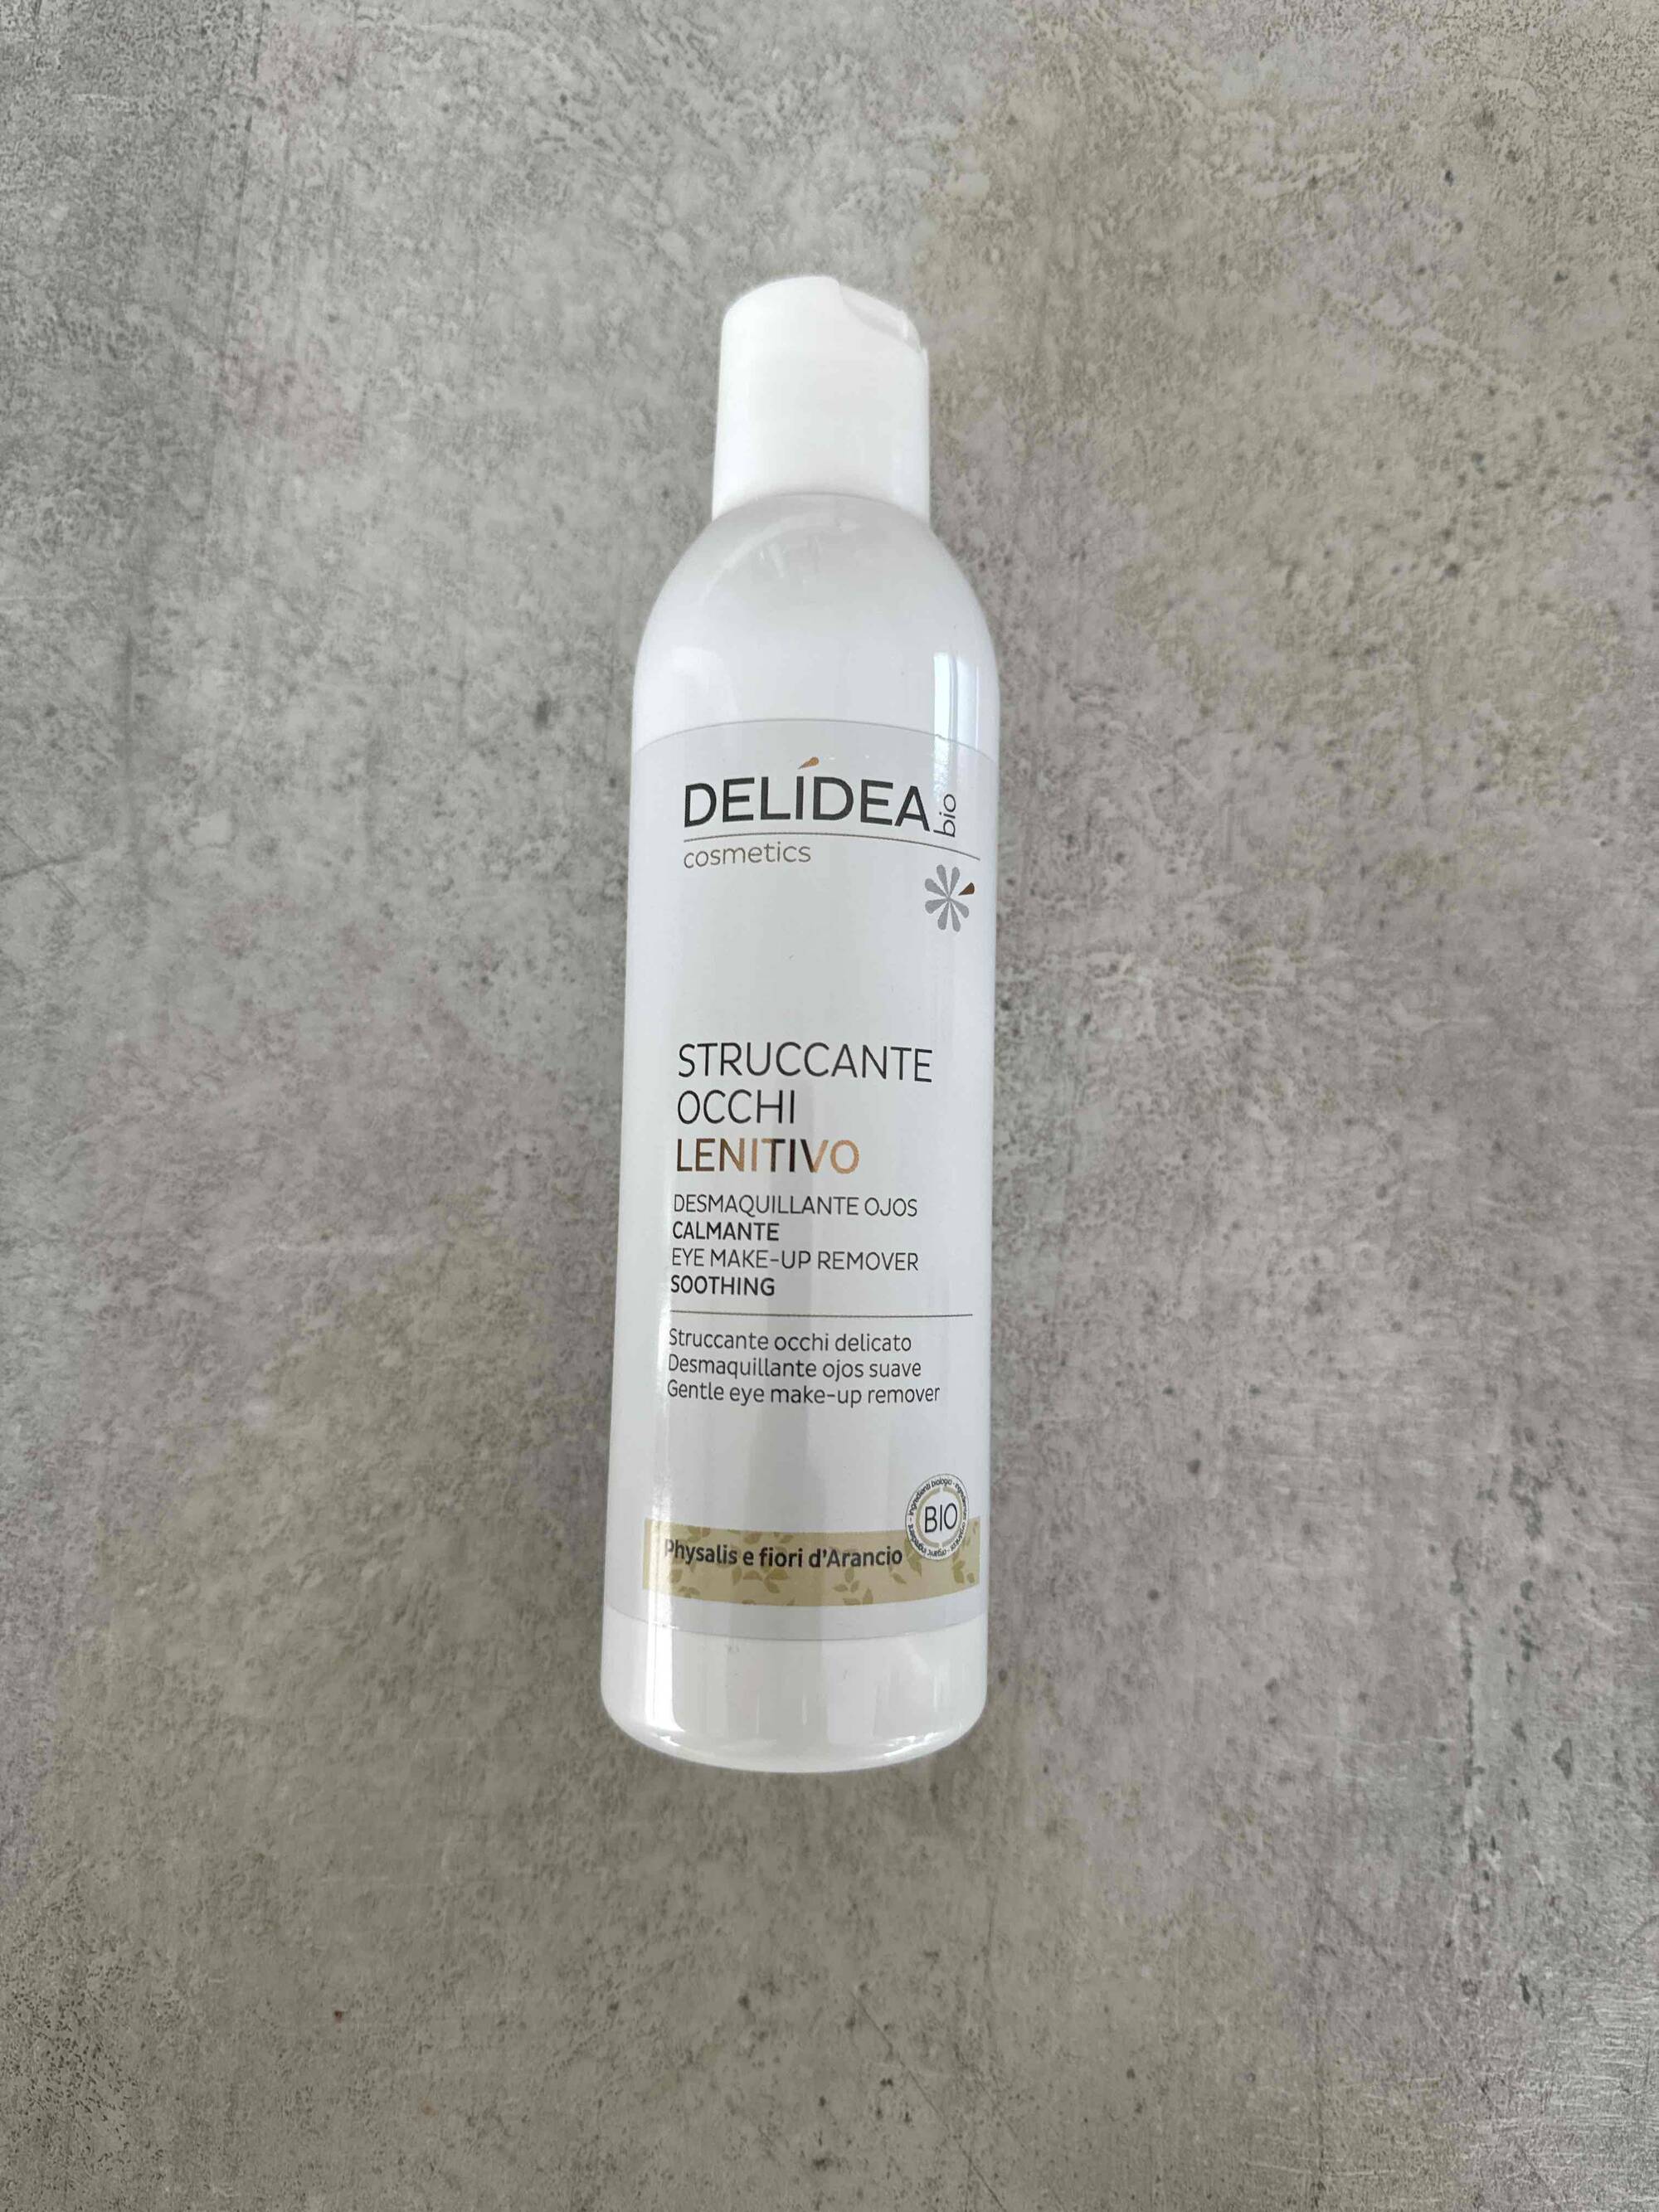 DELIDEA - Eye make-up remover soothing